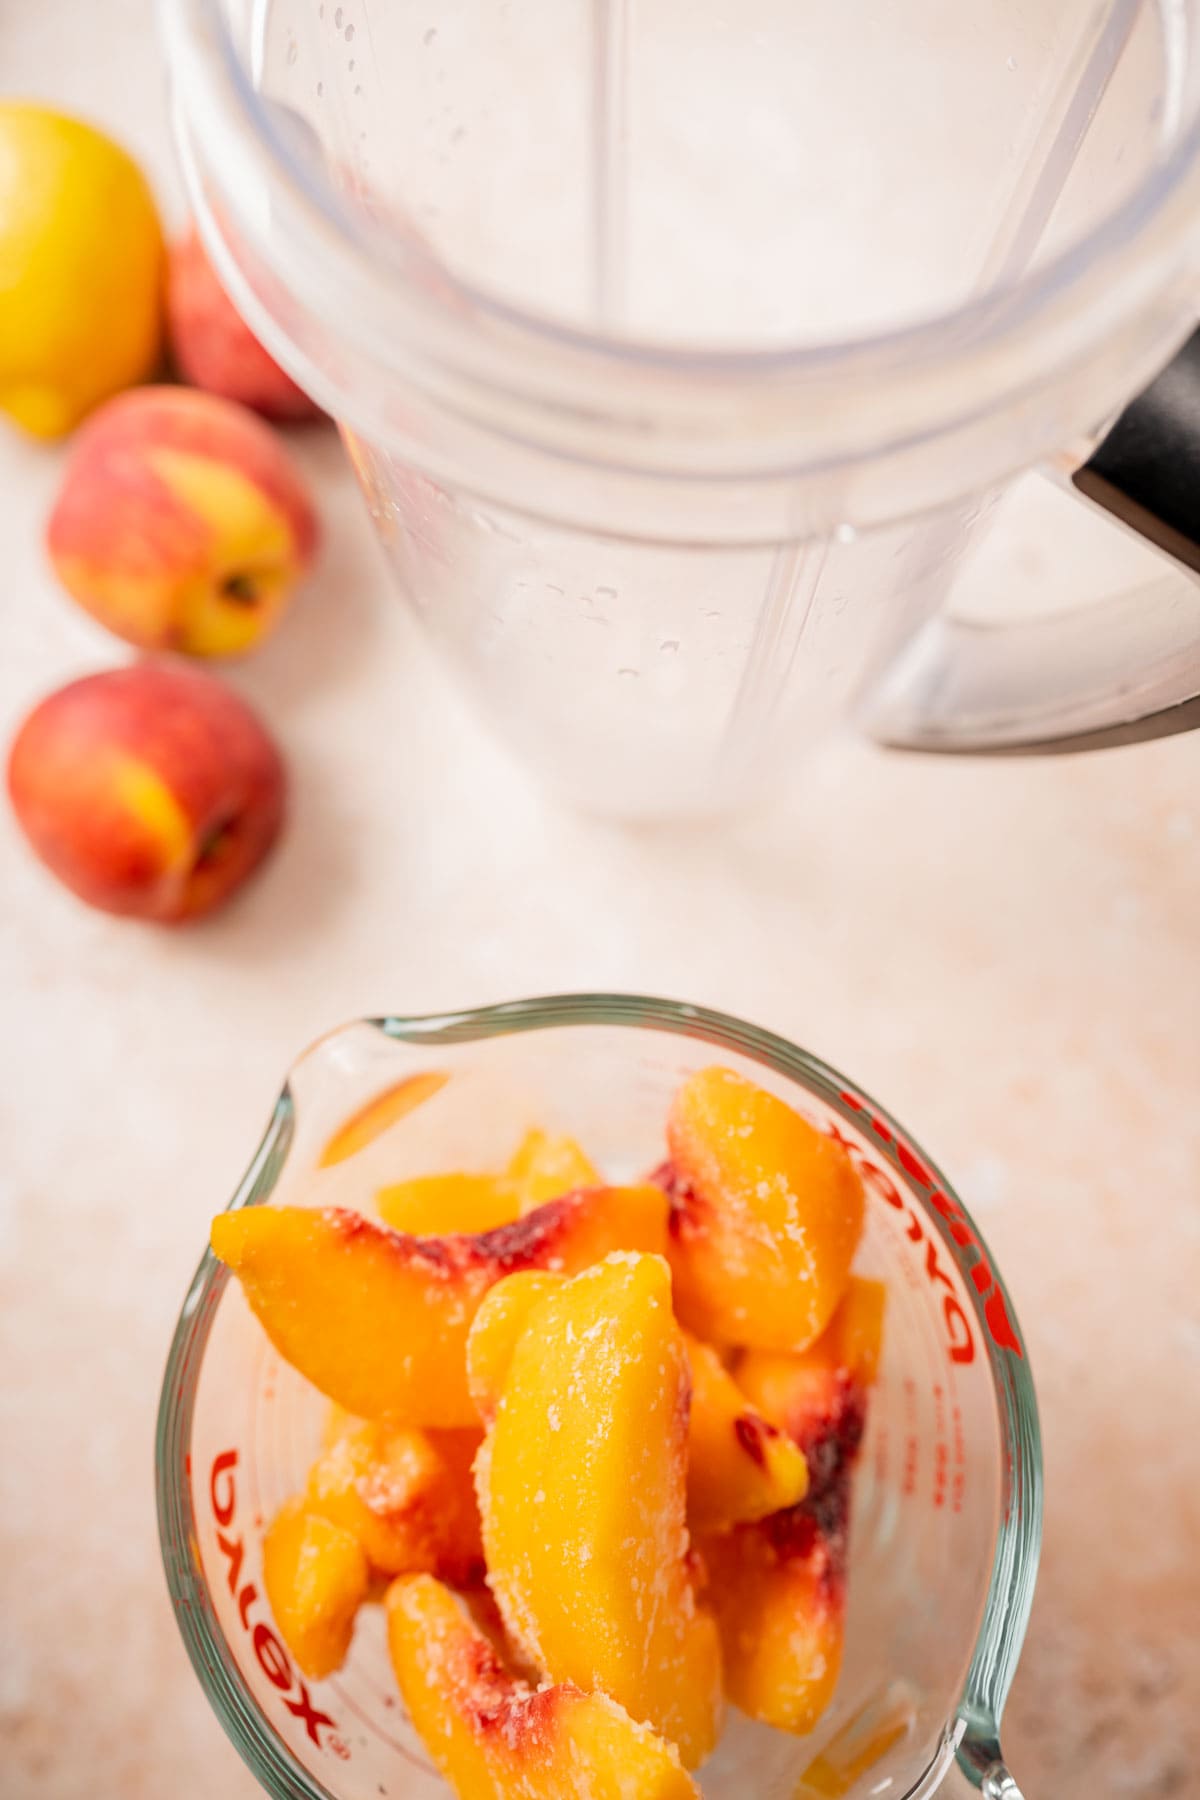 Top view of a blender container filled with peaches.